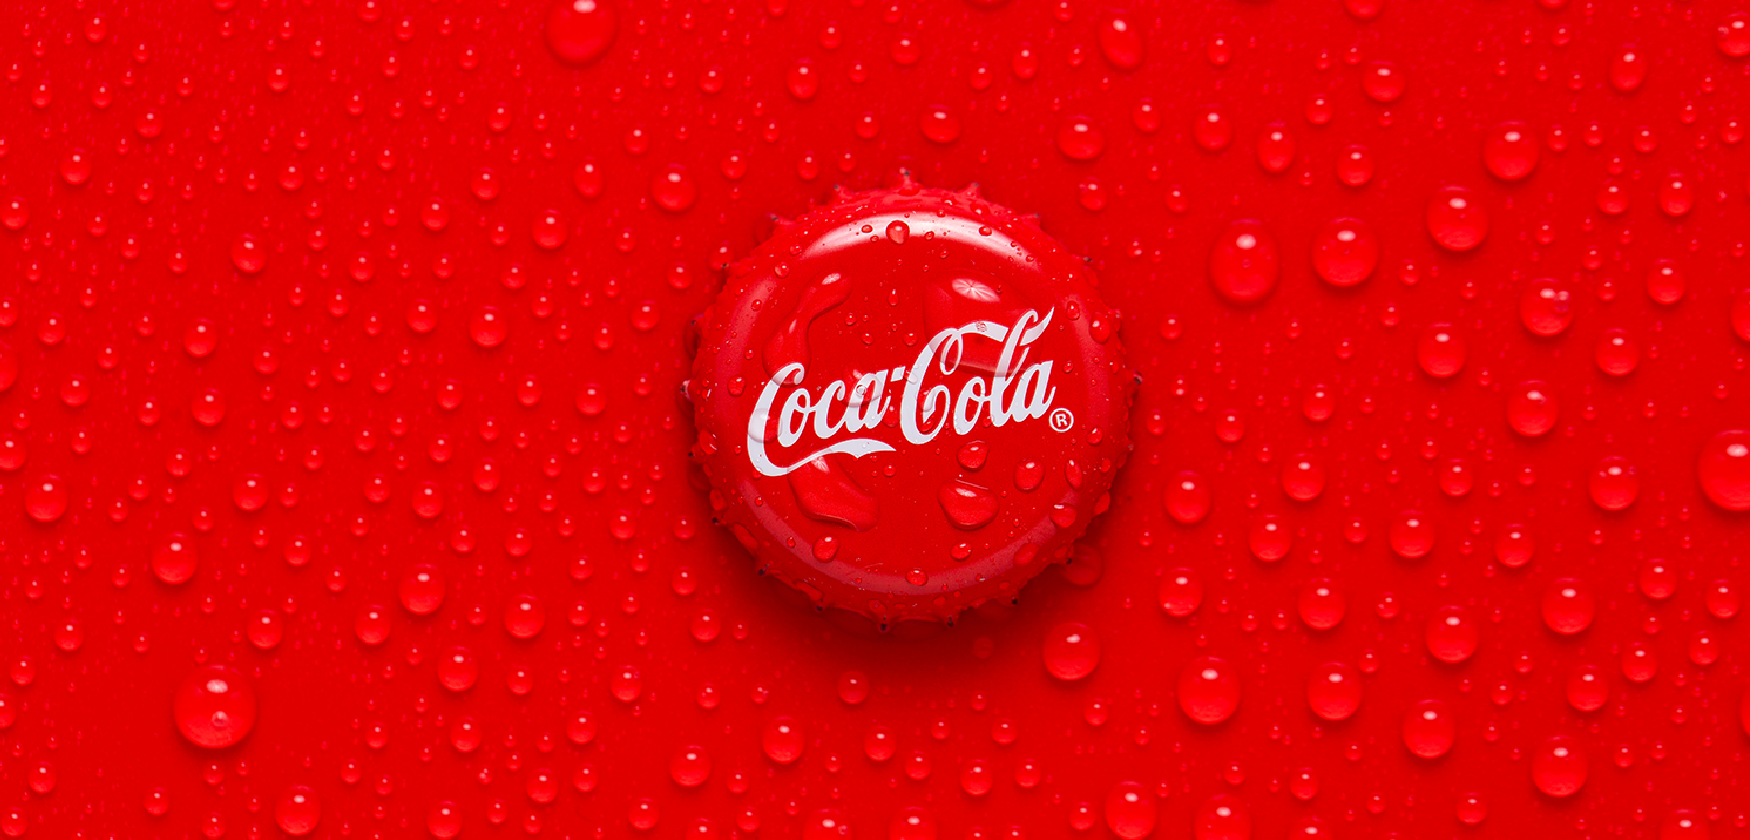 coca-cola bottle top on red background